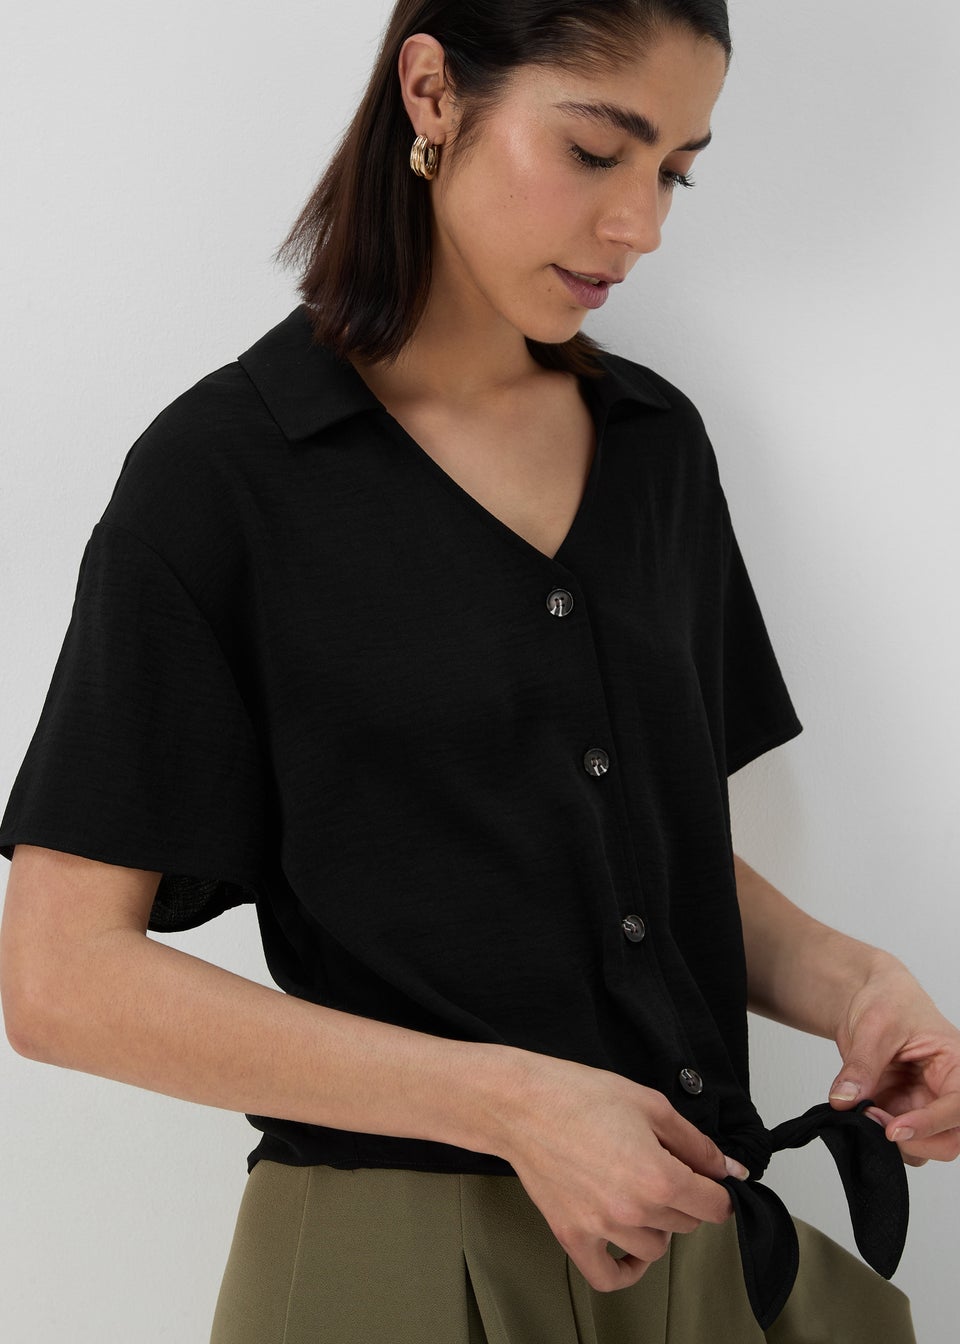 Black Solid Tie Front Airflow Shirt